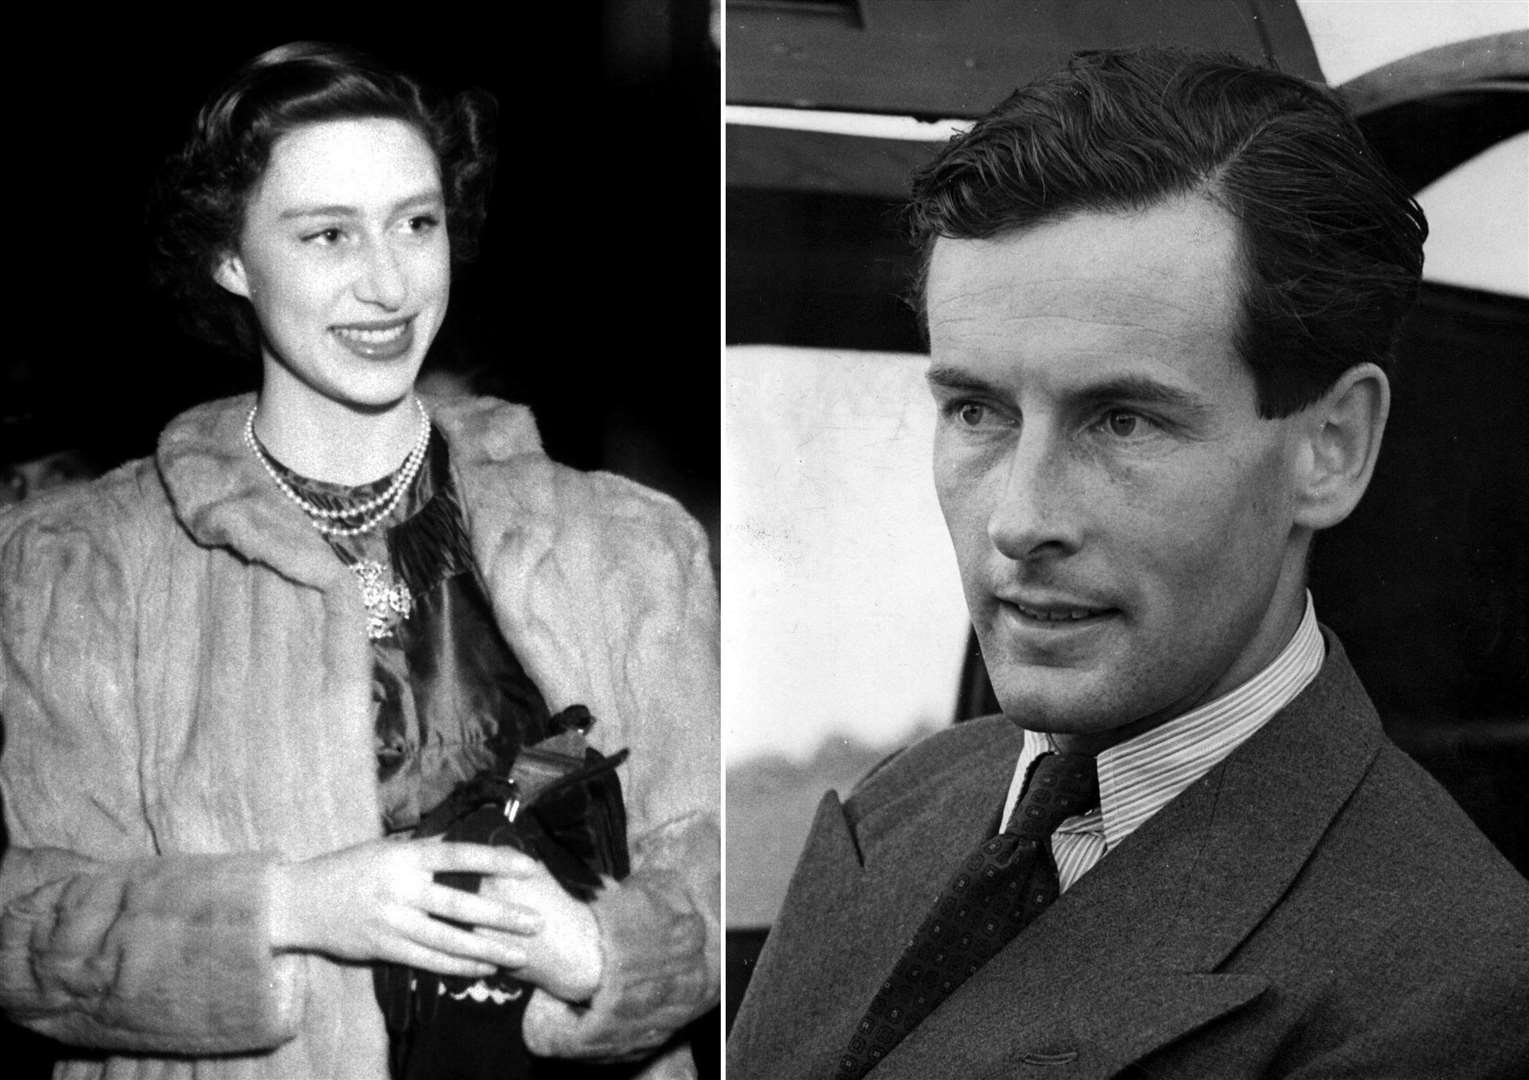 Princess Margaret and Group Captain Peter Townsend (PA)